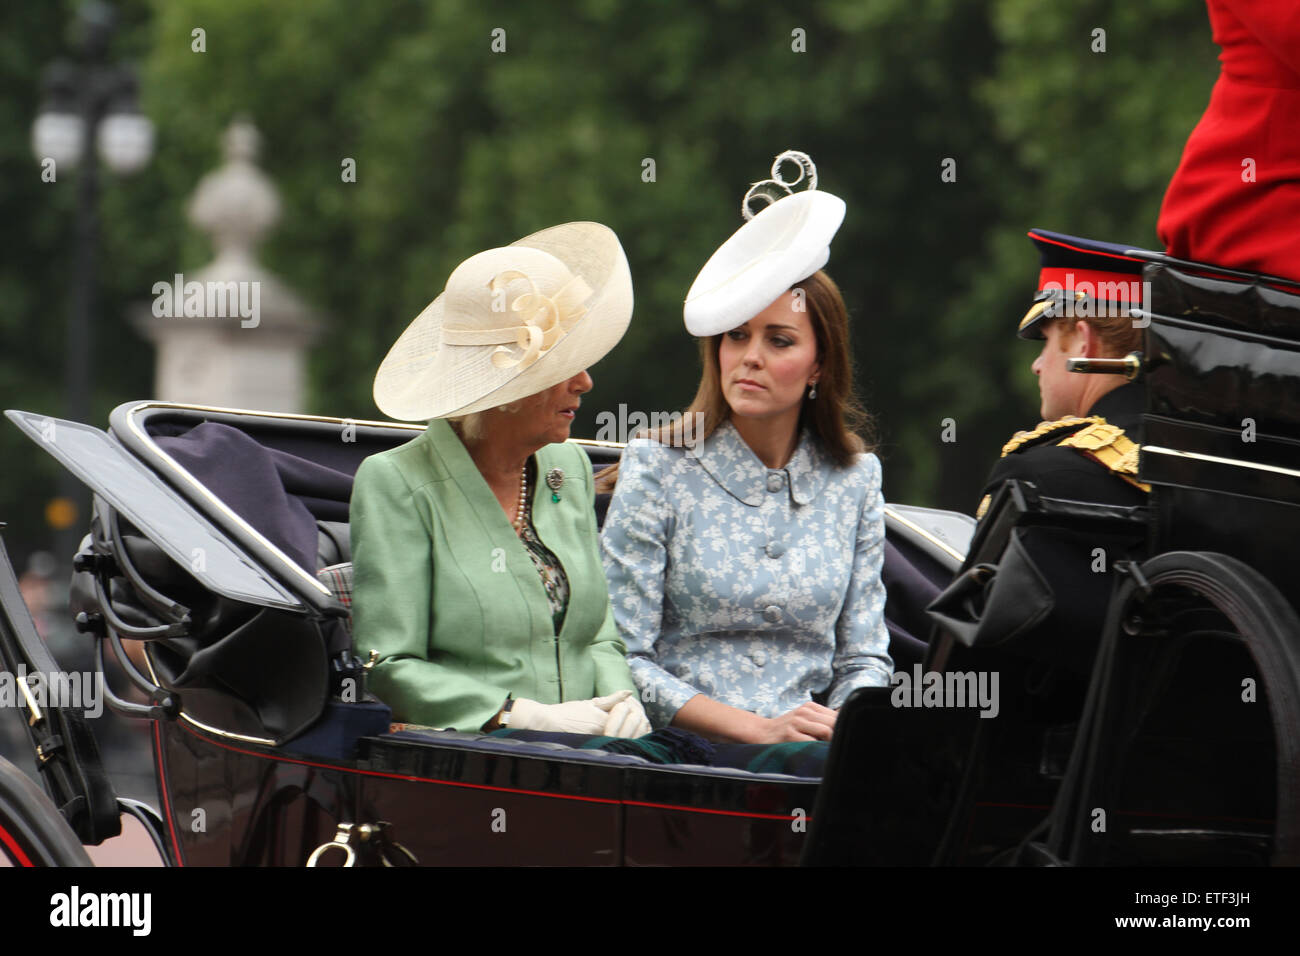 London, UK. 13th June, 2015. Camilla, Duchess of Cornwall with Catherine, Duchess of Cambridge and Prince Harry seen on a horse drawn carriage at the Mall.  .Since 1987, The Queen has attended in a carriage rather than riding, which she did before that on 36 occasions, riding side-saddle and wearing the uniform of the regiment whose Colour was being trooped. Credit:  david mbiyu/Alamy Live News Stock Photo